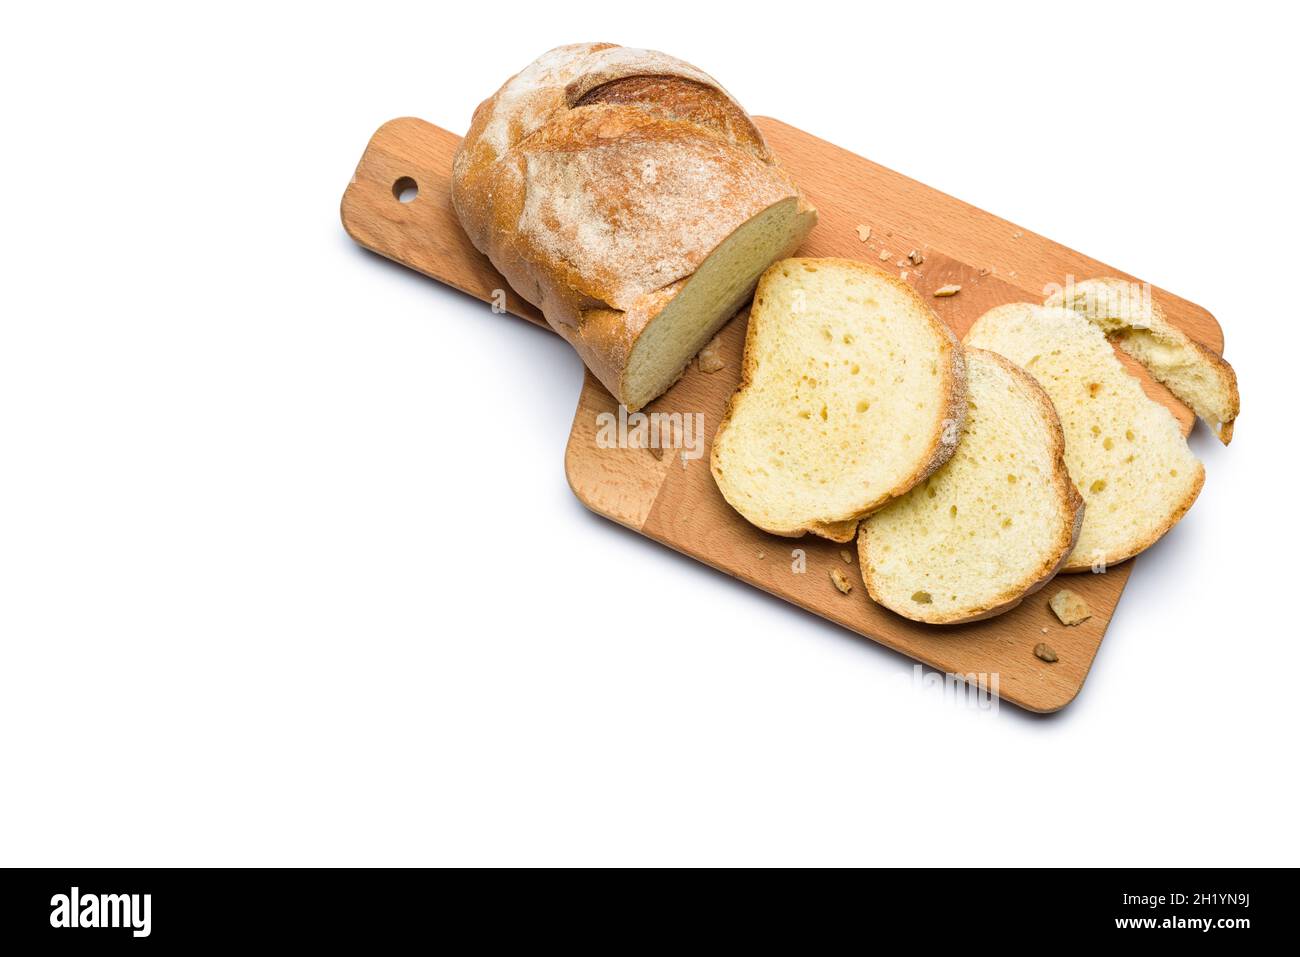 Sliced fresh bread and crumbs on wooden cutting board. Top view isolated on white background. Stock Photo